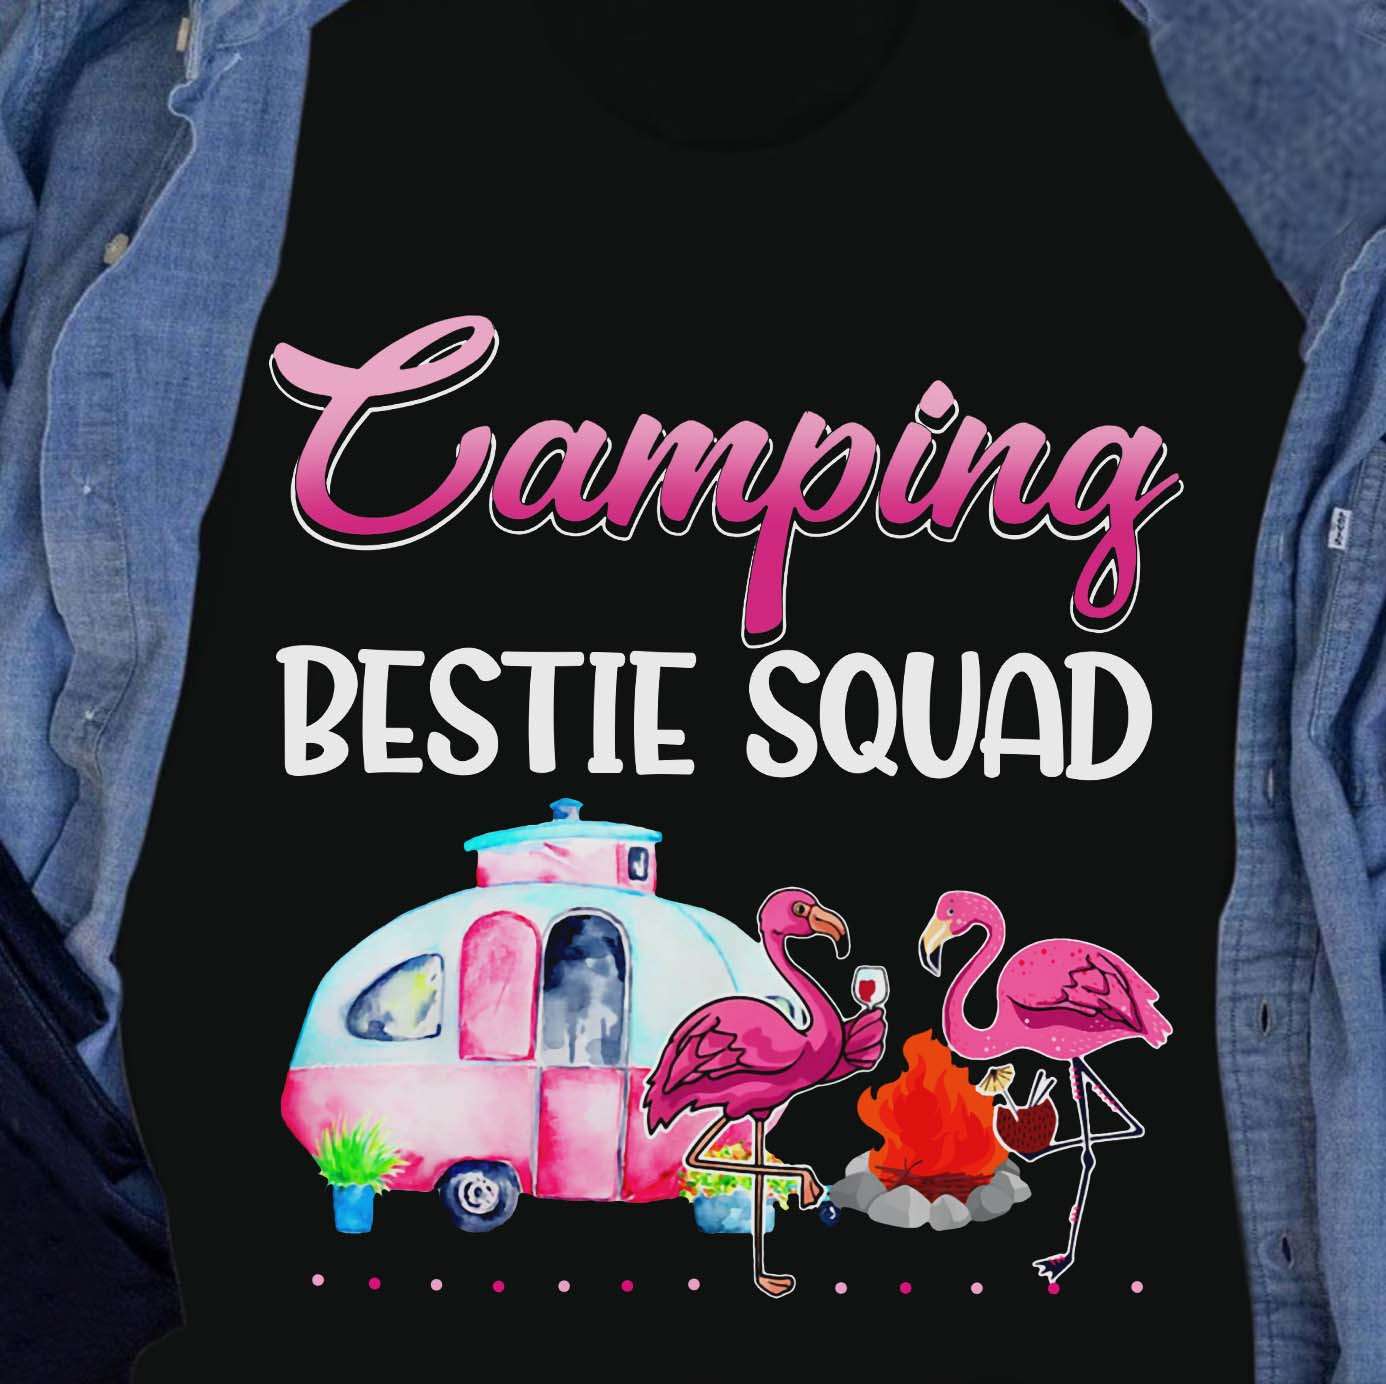 Camping bestie squad - Flamingo bestie camping squad, camping and drinking